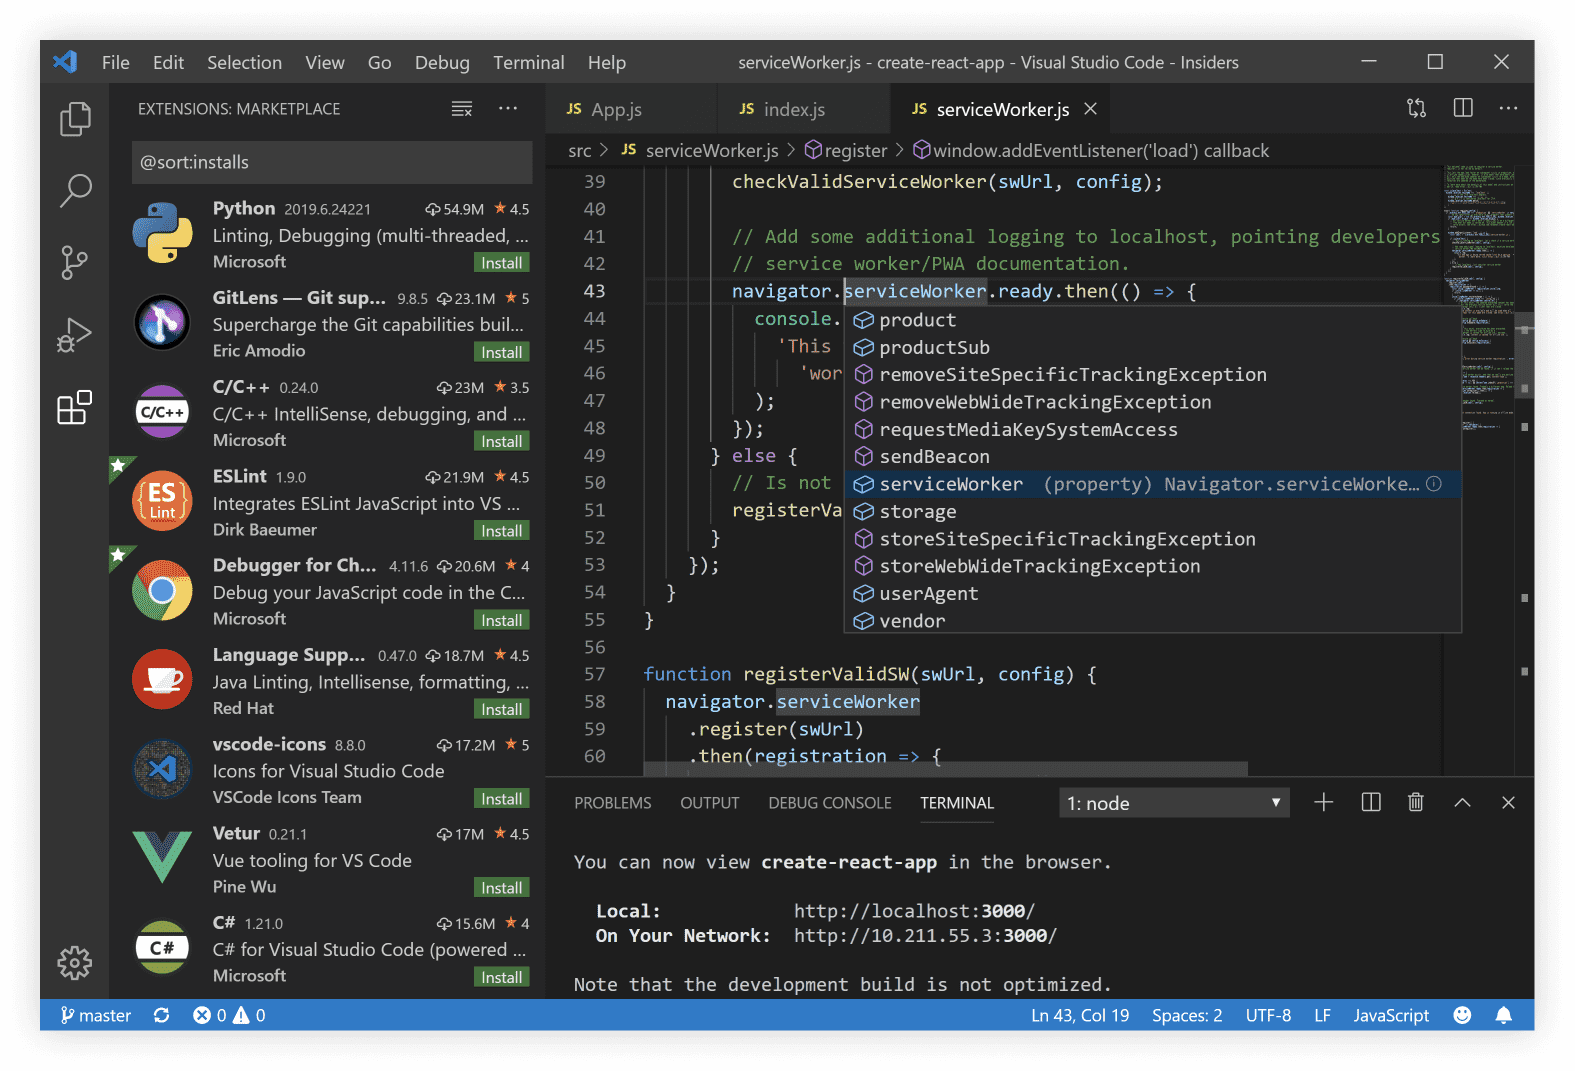 Microsoft is ending support for the Visual Studio IDE for Mac